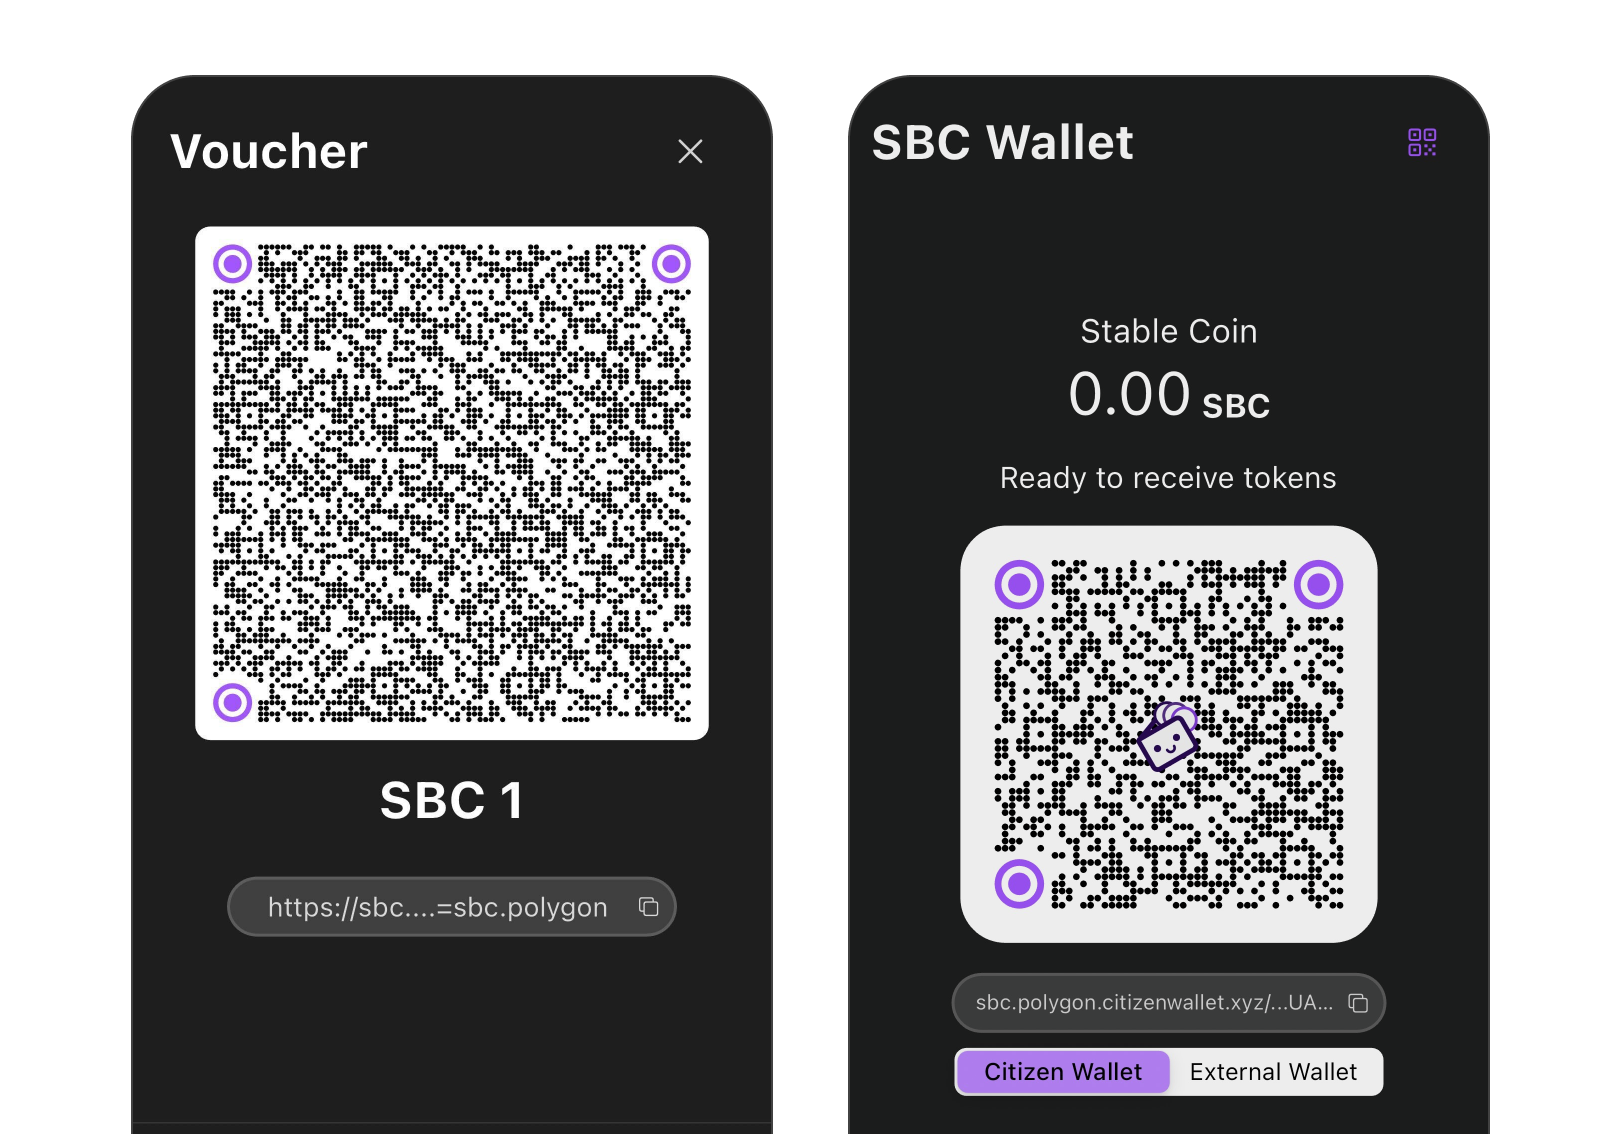 Citizen Wallet UI screenshot of an example voucher and wallet QR codes for
Stable Coin (SBC) | Brale